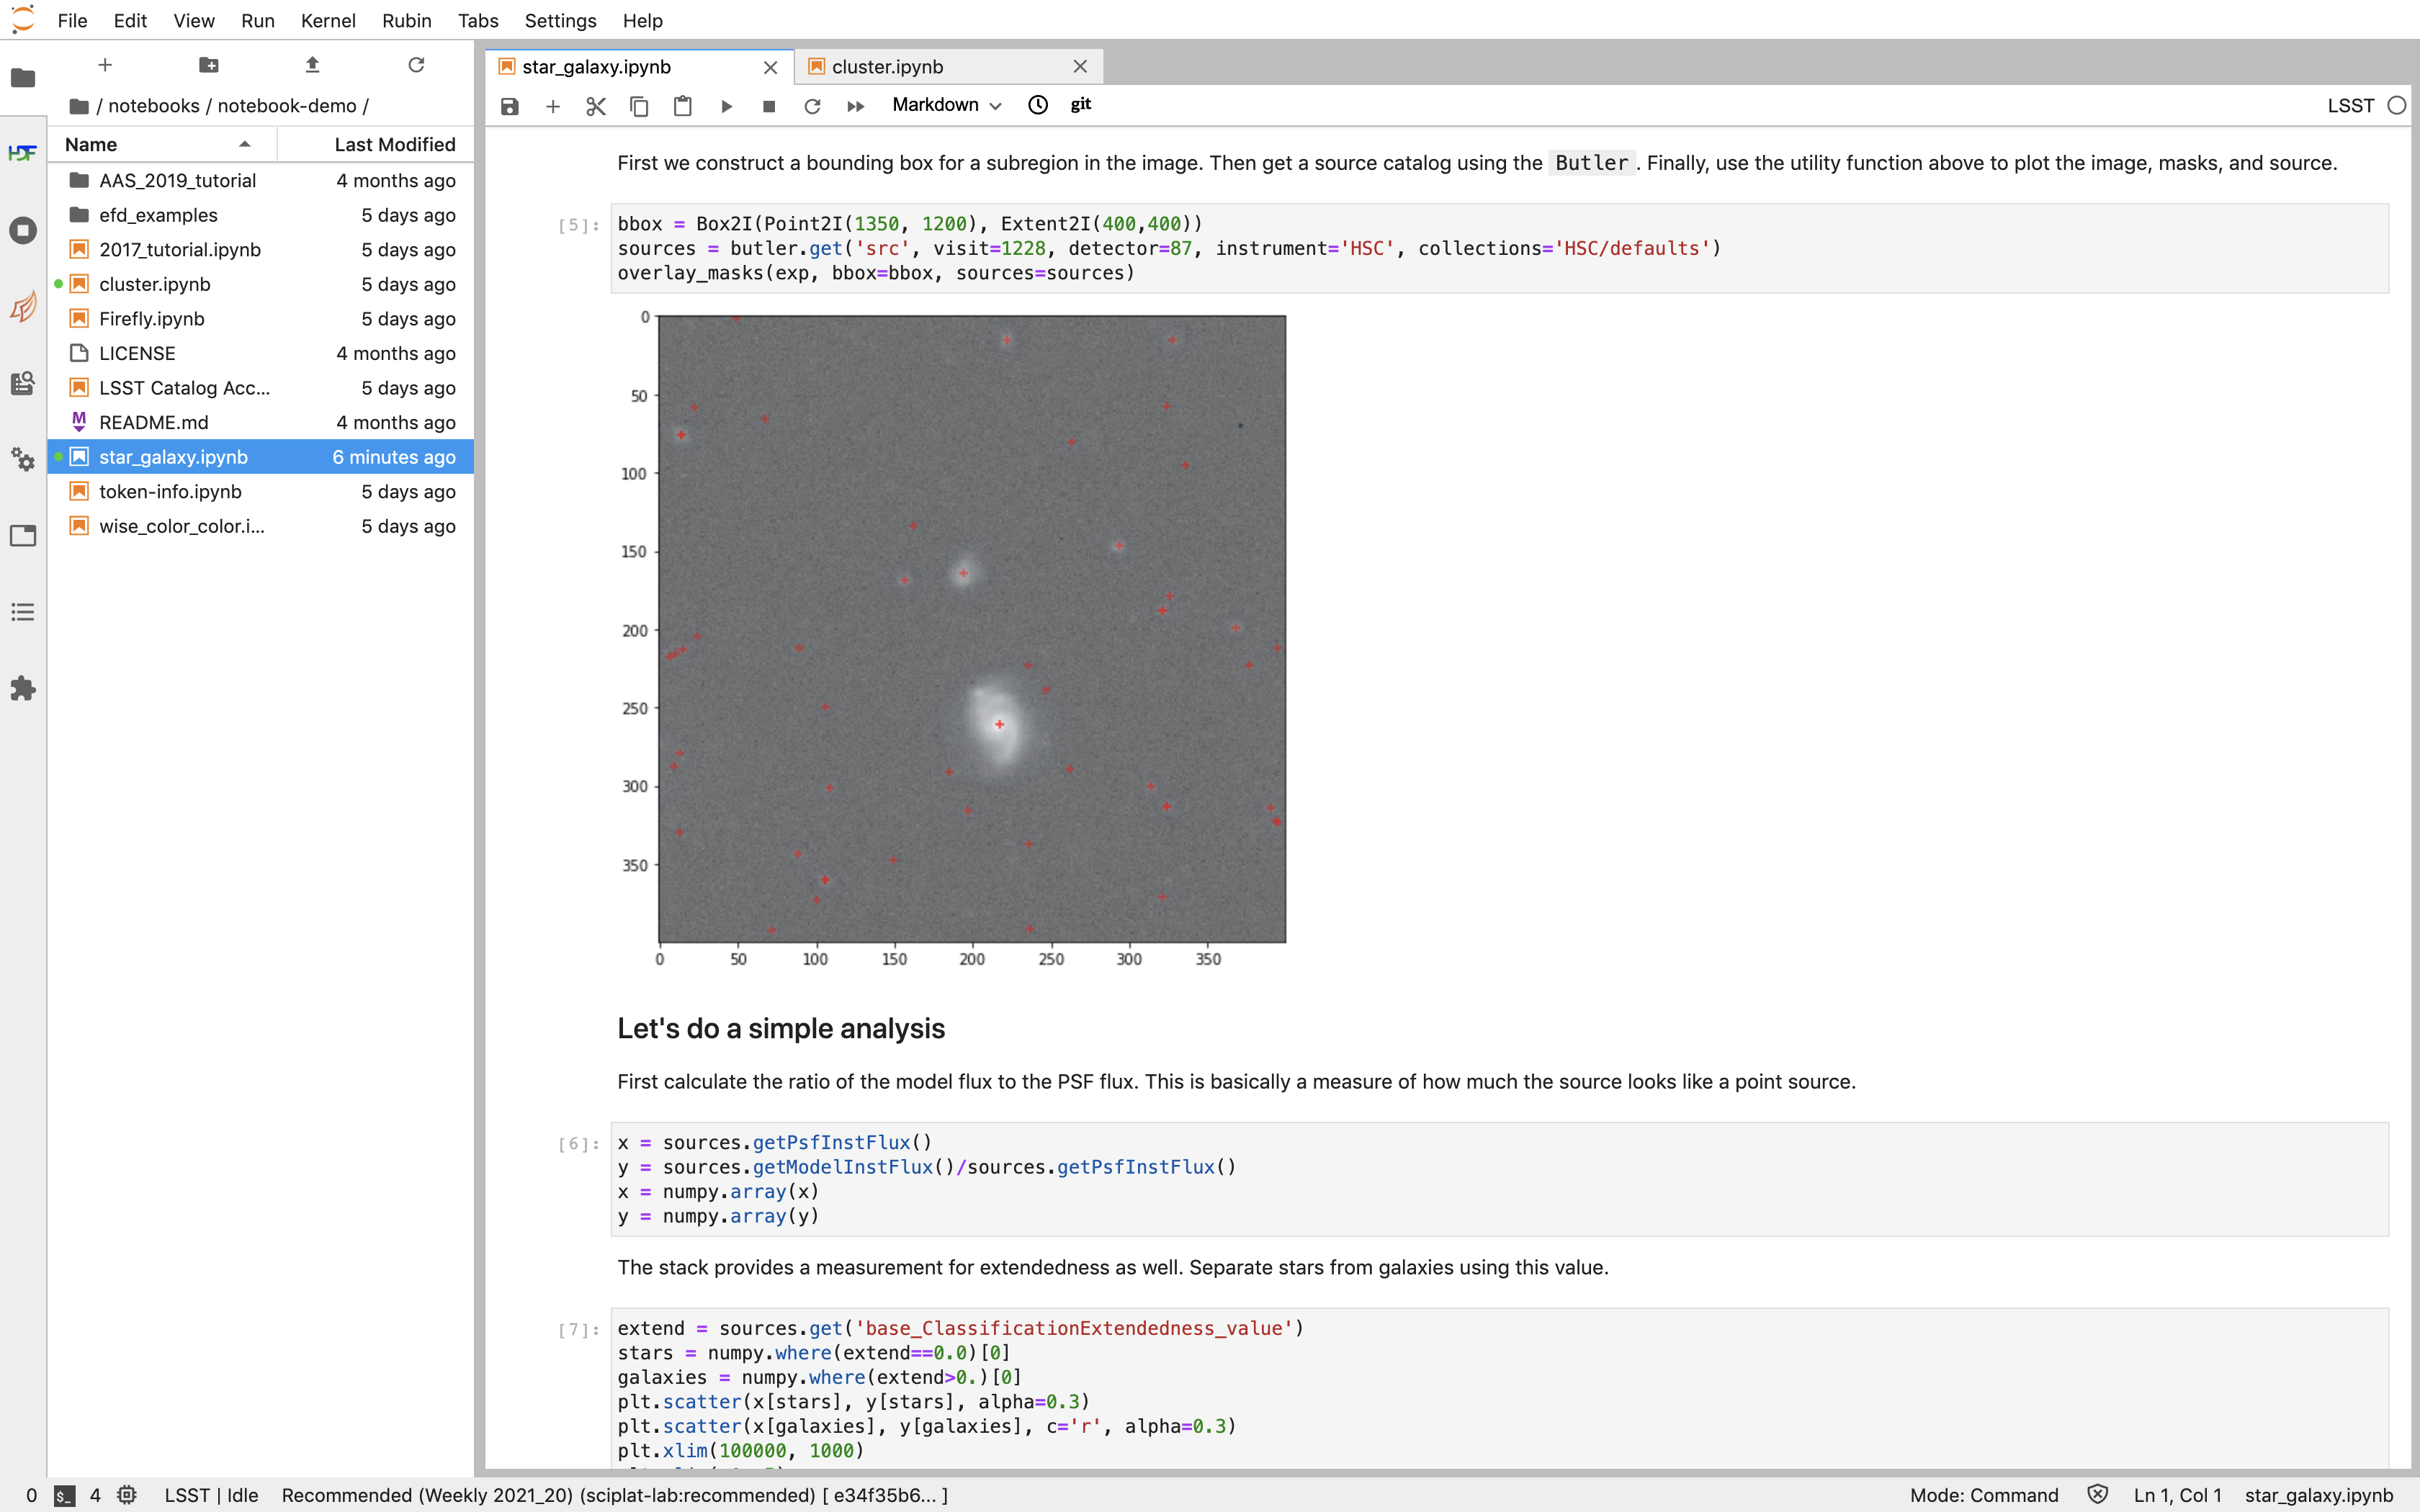 This image is a screenshot of tutorial notebook 01, titled introduction to DP0.2. The notebook has been scrolled down to Section 3.3, which contains both markdown text and code cells which have been executed. The last code cell has produced a greyscale image of a rich galaxy cluster. Across the top of the notebook there is a menu bar of actions for users. Actions include save notebook, set cell type, and insert, cut, copy, paste, run, or interrupt cells.